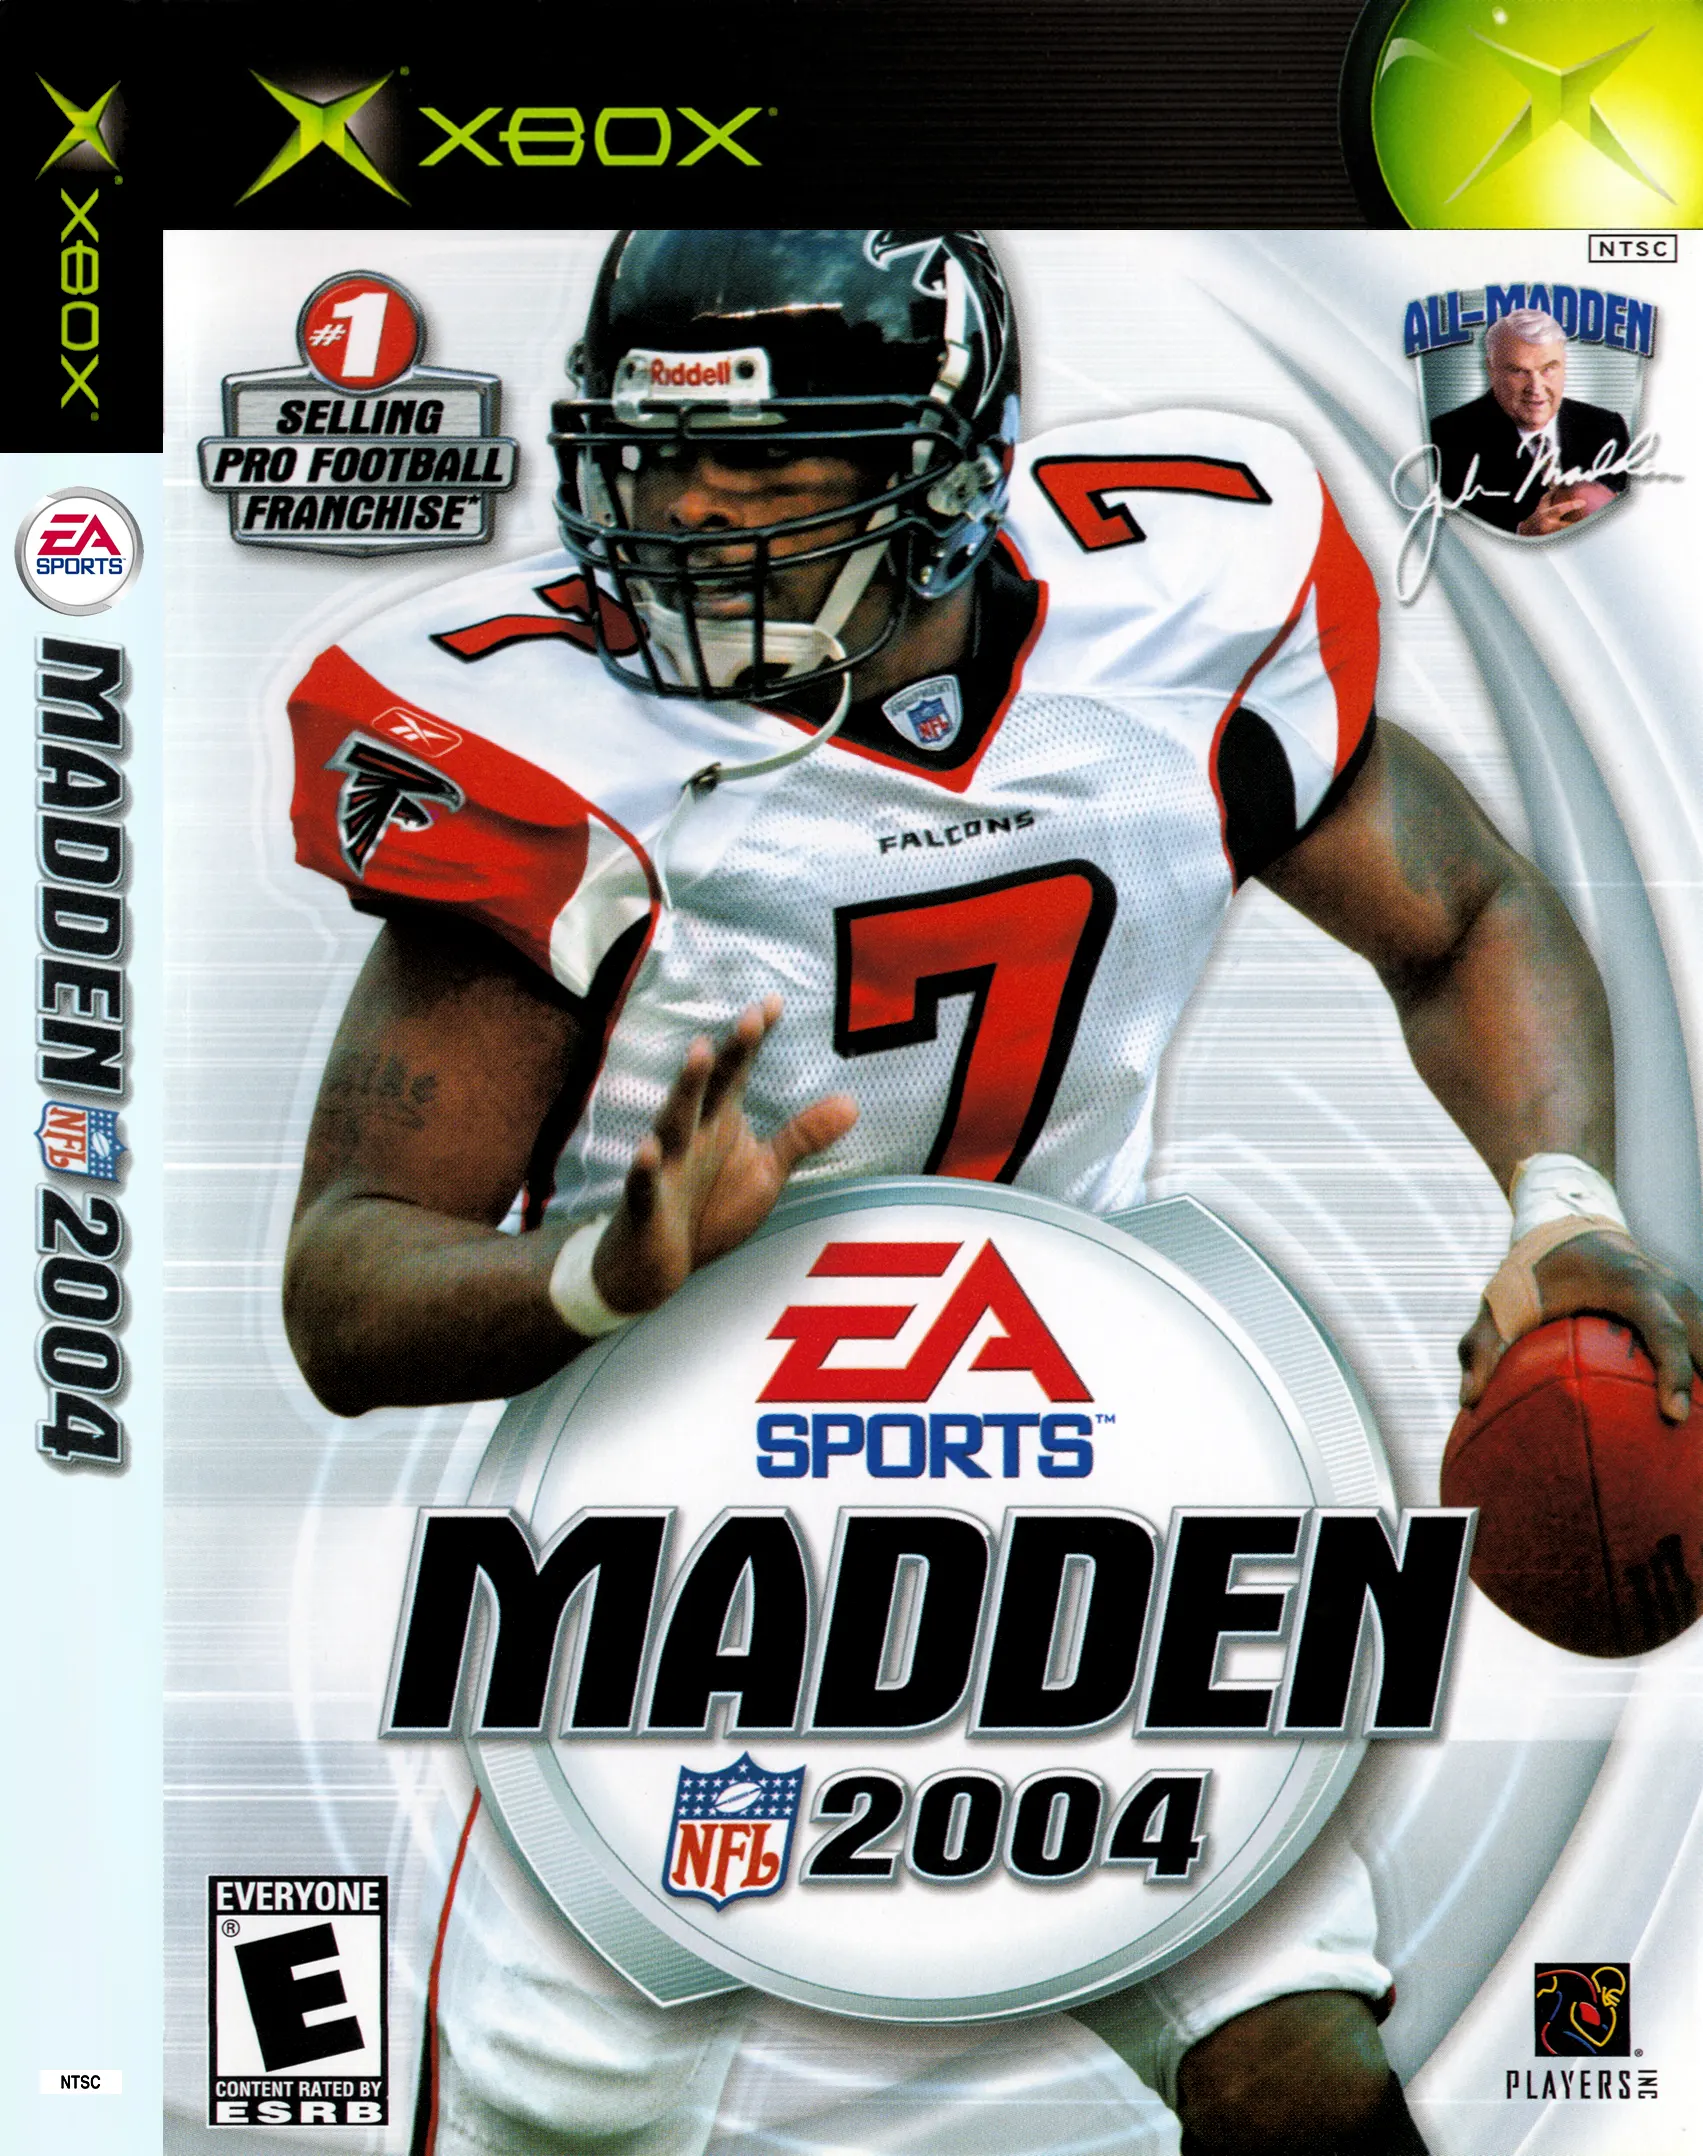 Original Xbox Game Console Madden NFL 2004 game box front.